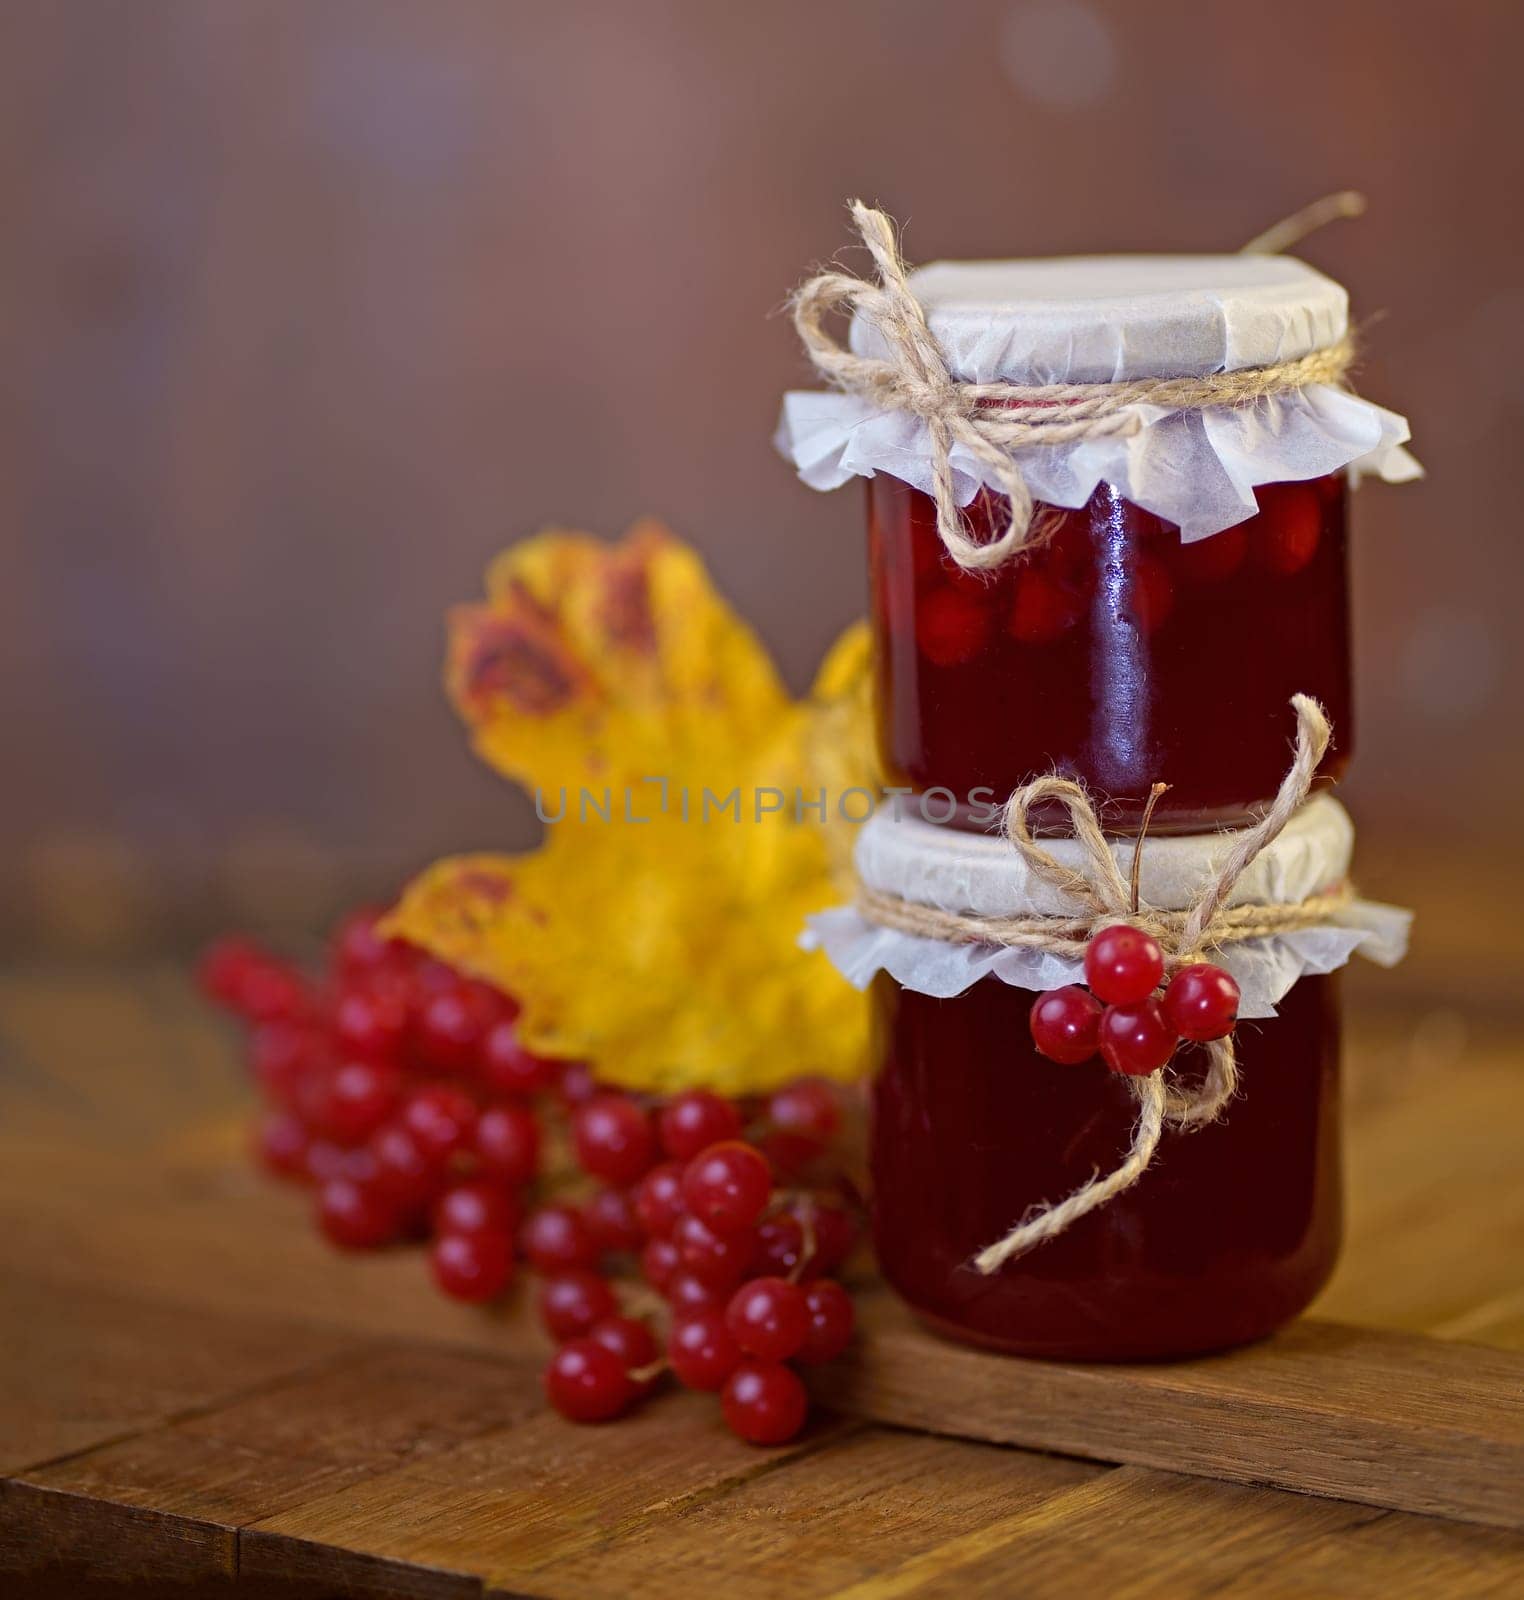 Viburnum fruit jam in a glass jar on a wooden table, preparations for the winter